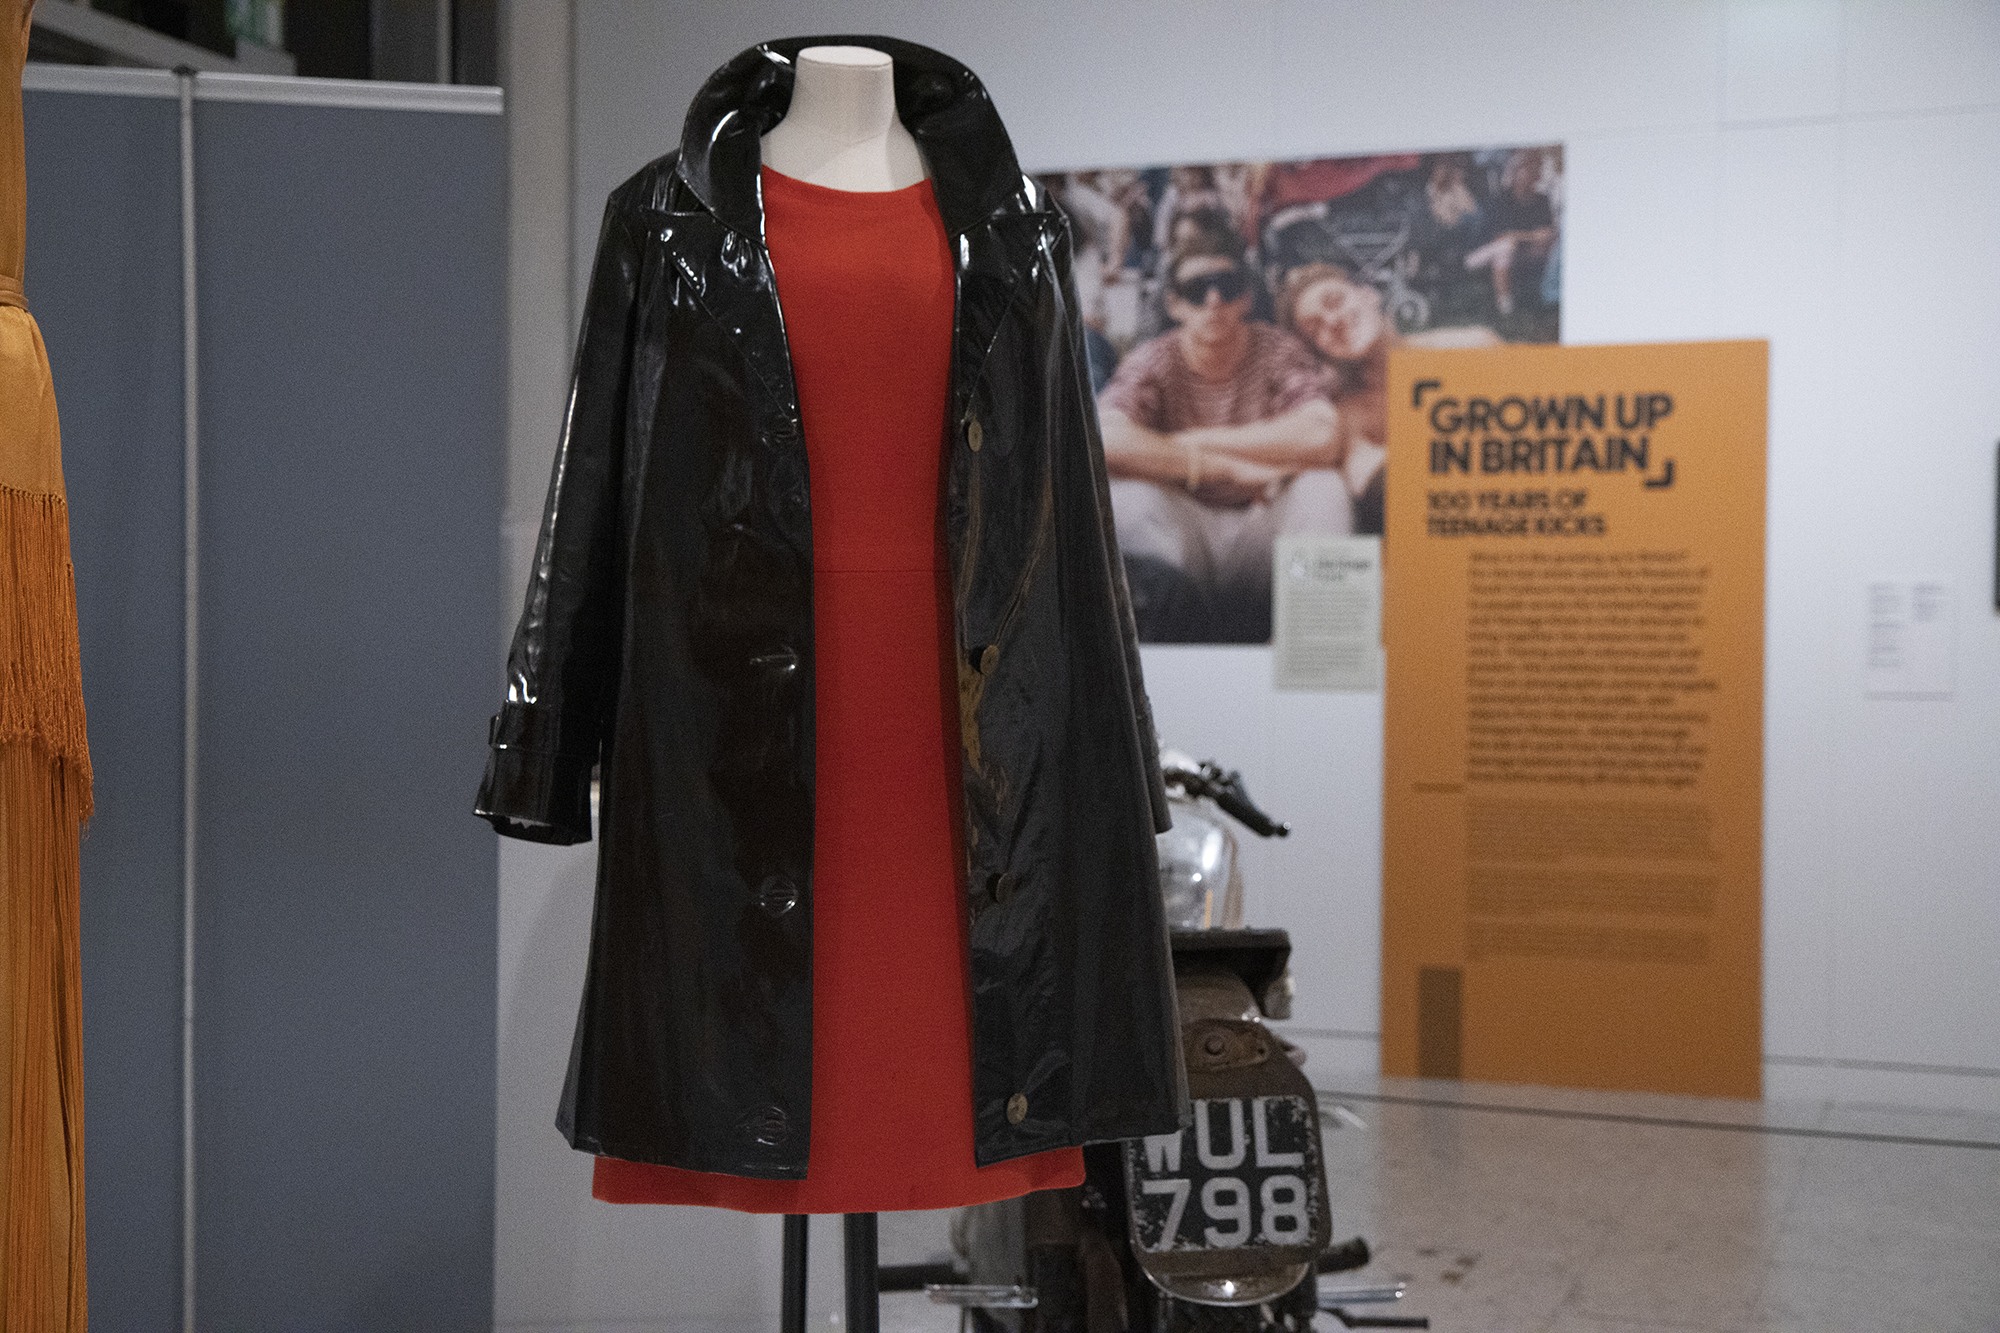 A red mini dress with a black patent mac on display in Grown Up in Britain